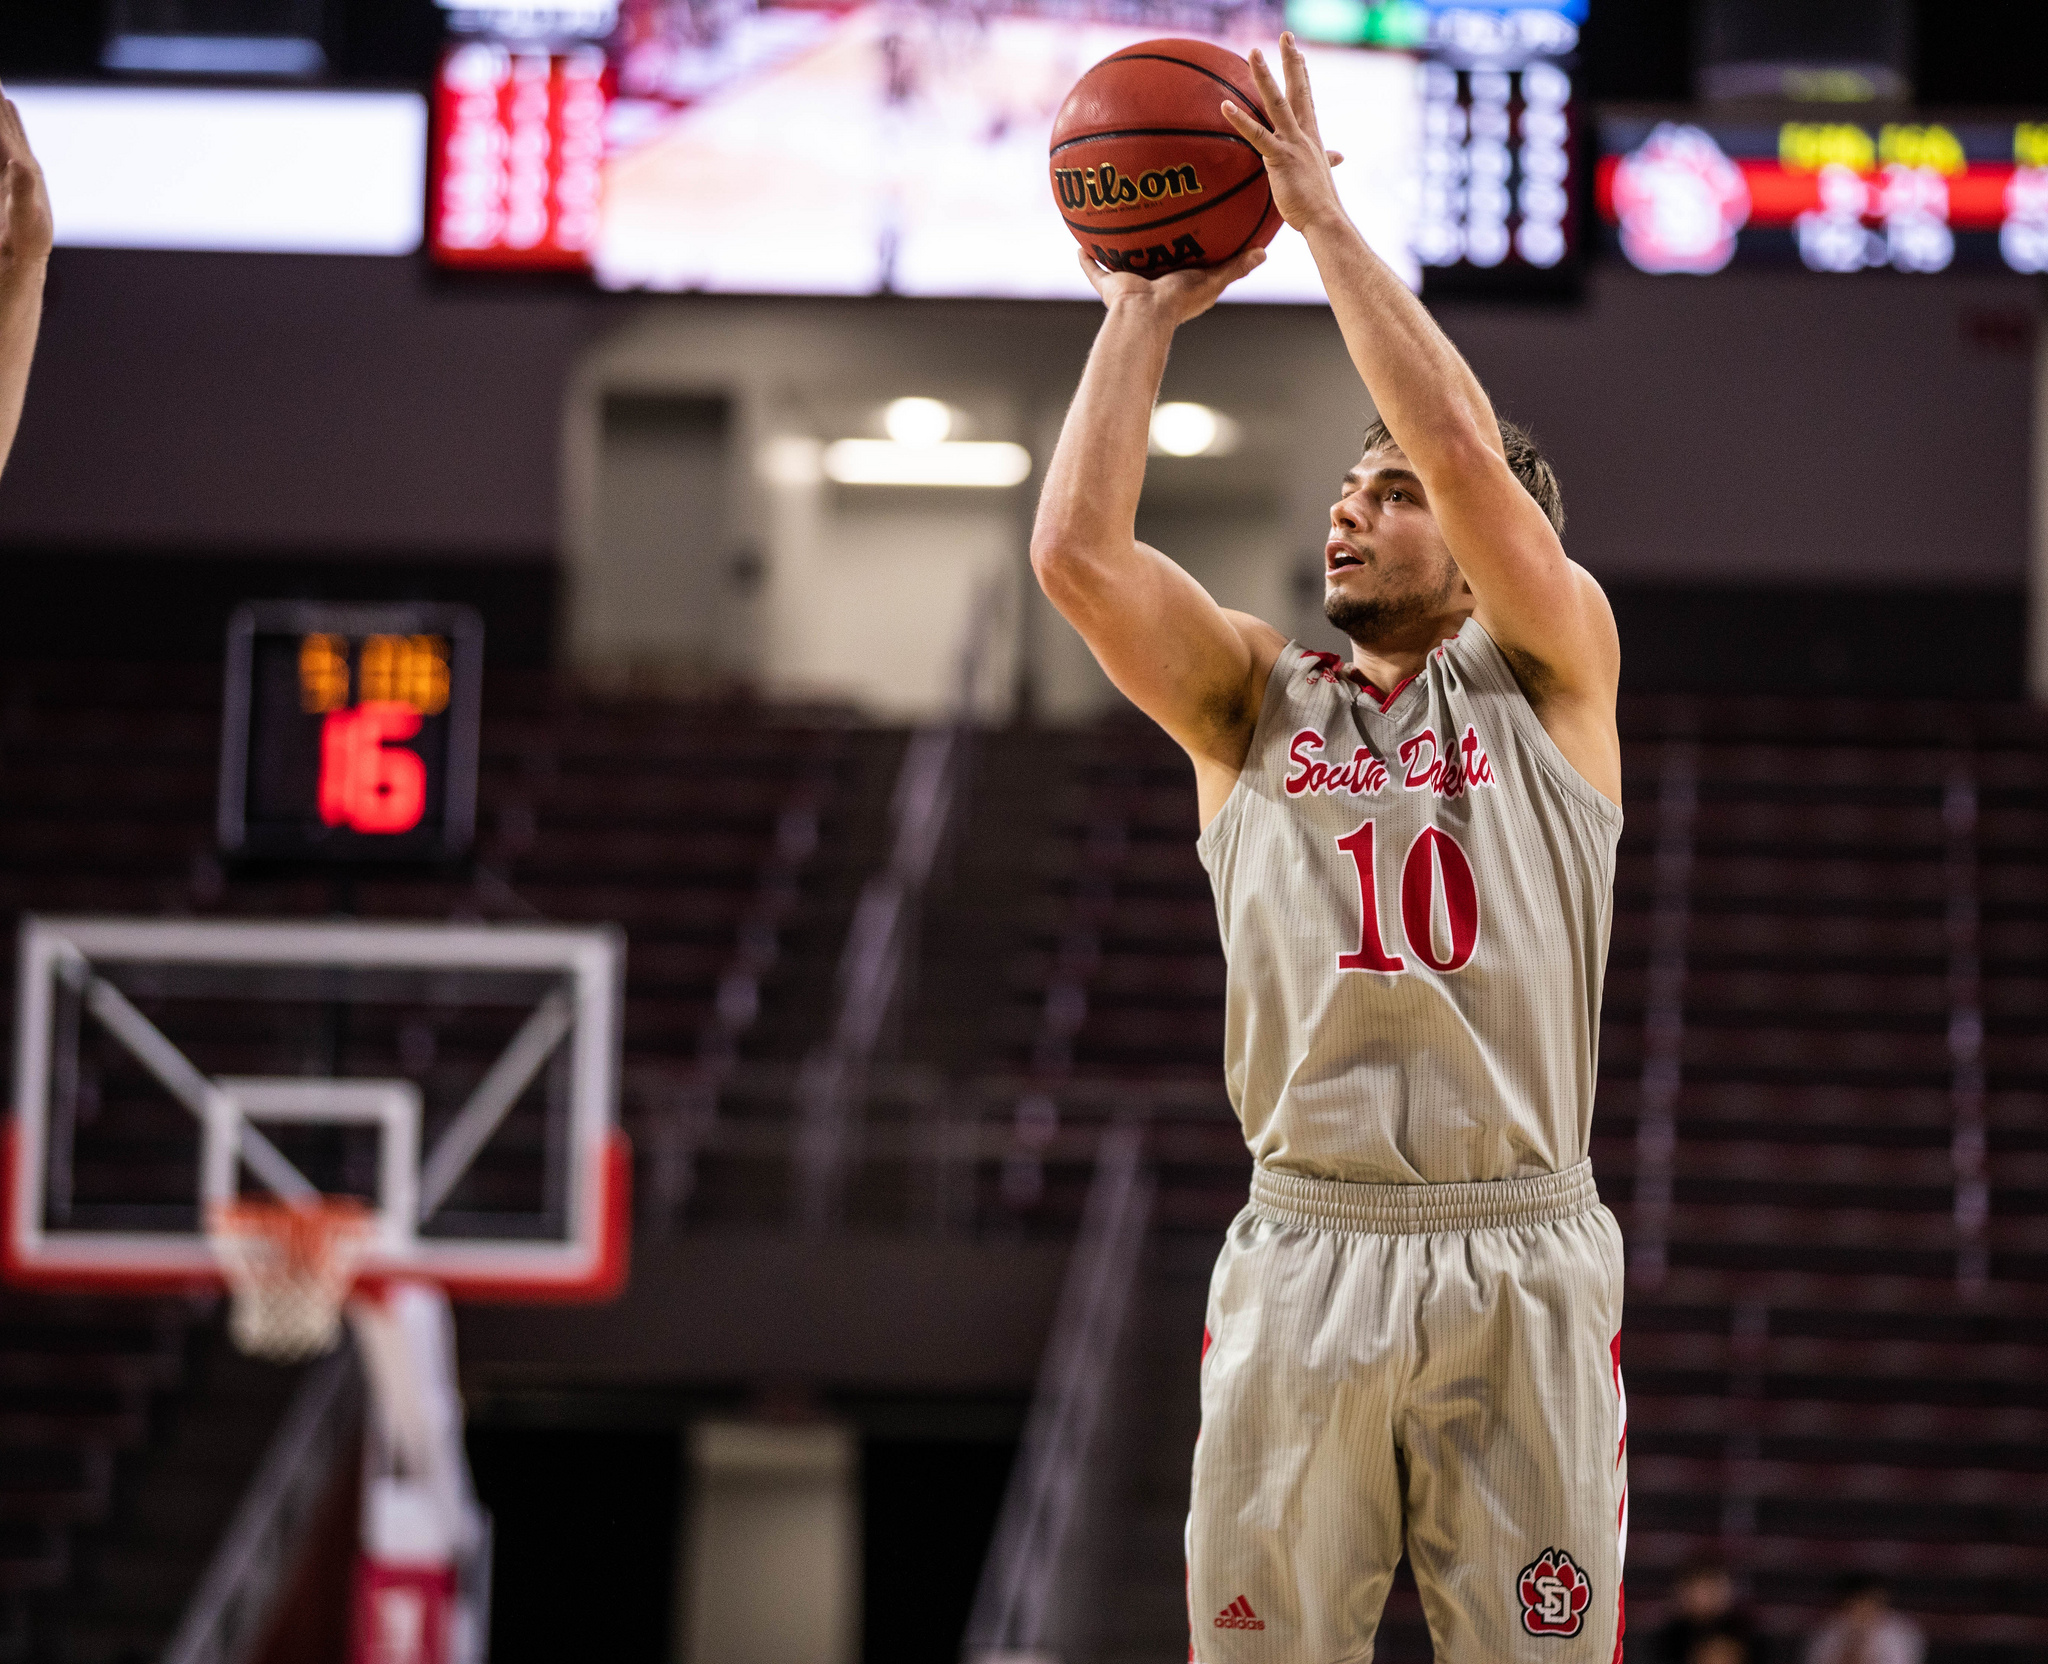 Out-sized under the basket, Coyotes drop narrow battle to Omaha